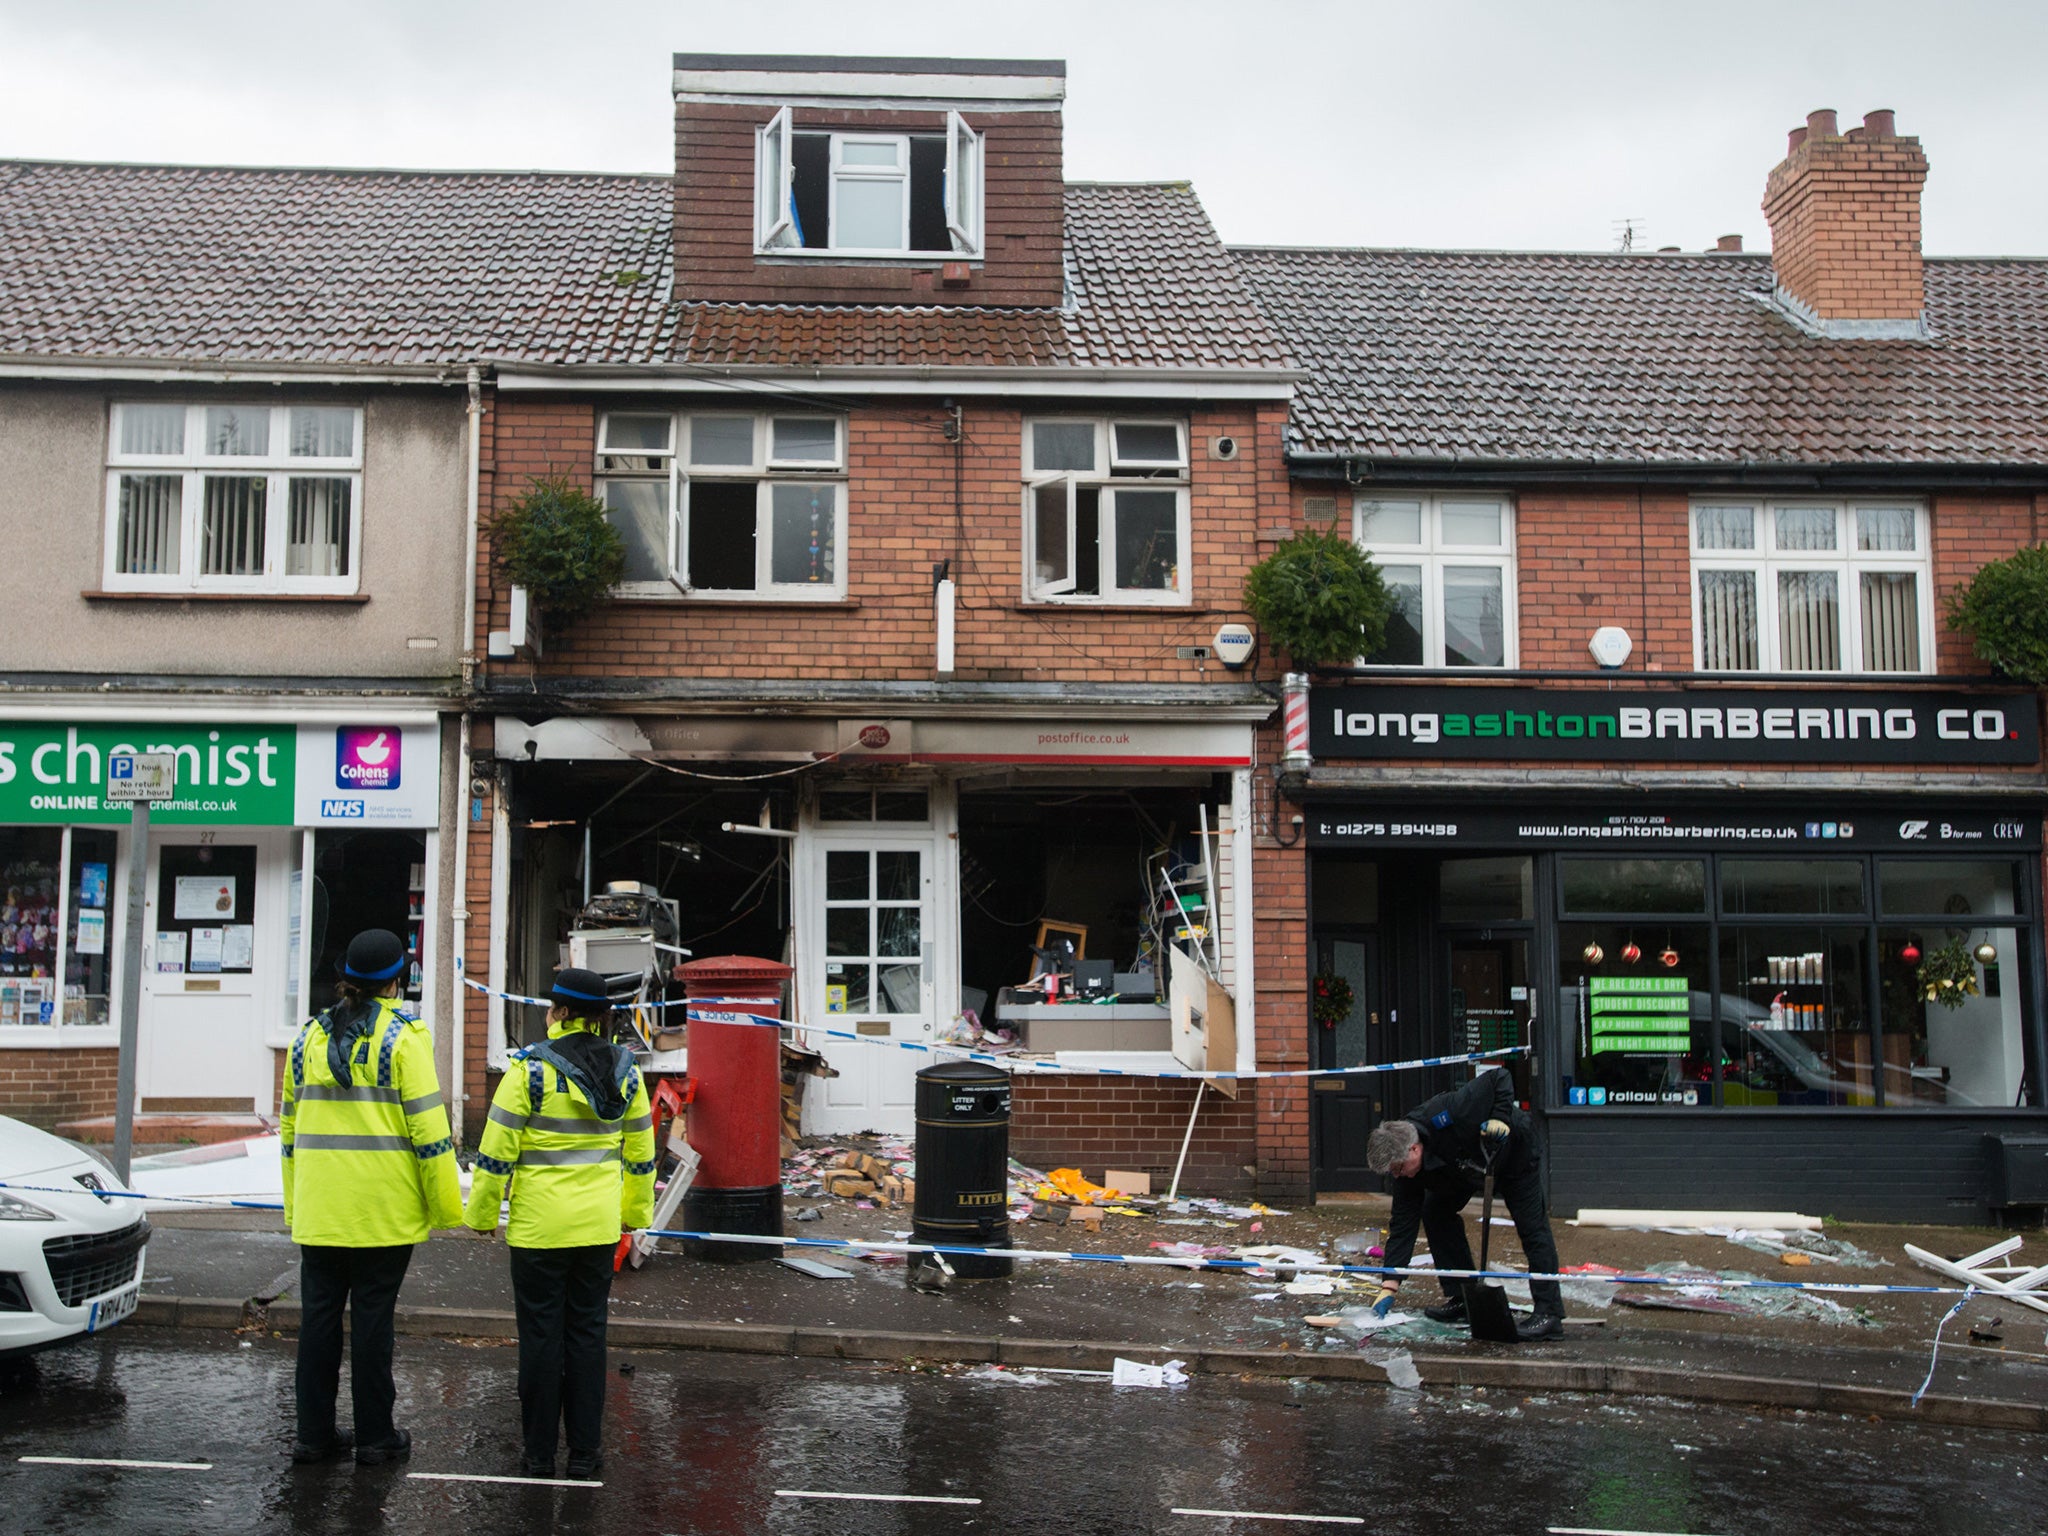 General view of the scene at the blown-up Post Office in Long Ashton, Bristol, England. January 4 2015